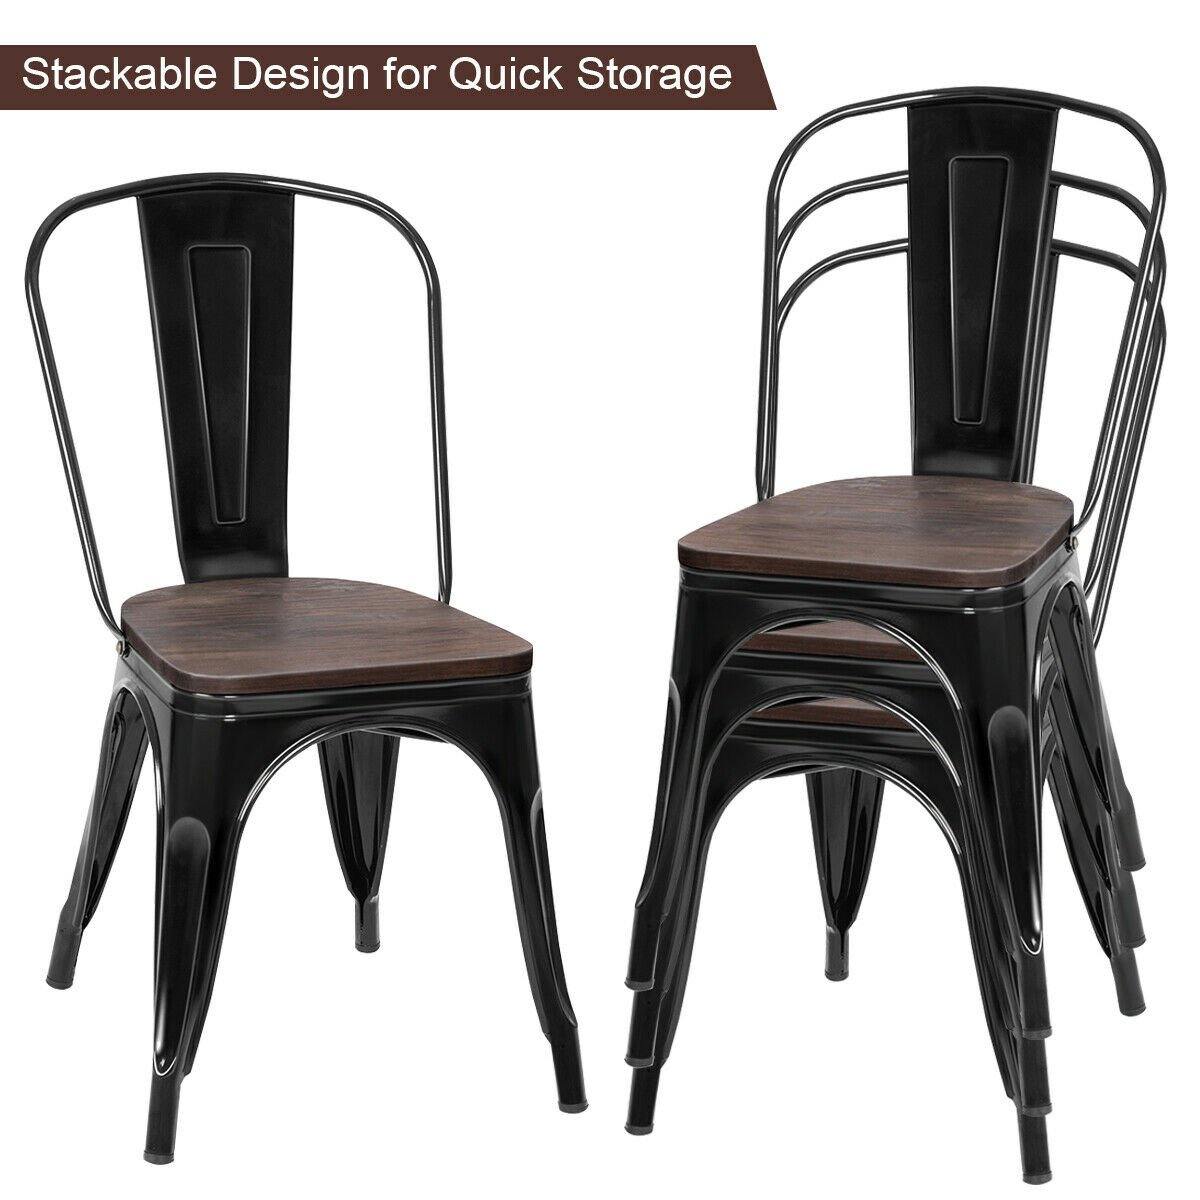 Set of 4 Metal Wood Dining Chair of Stackable Tolix Style - Bosonshop